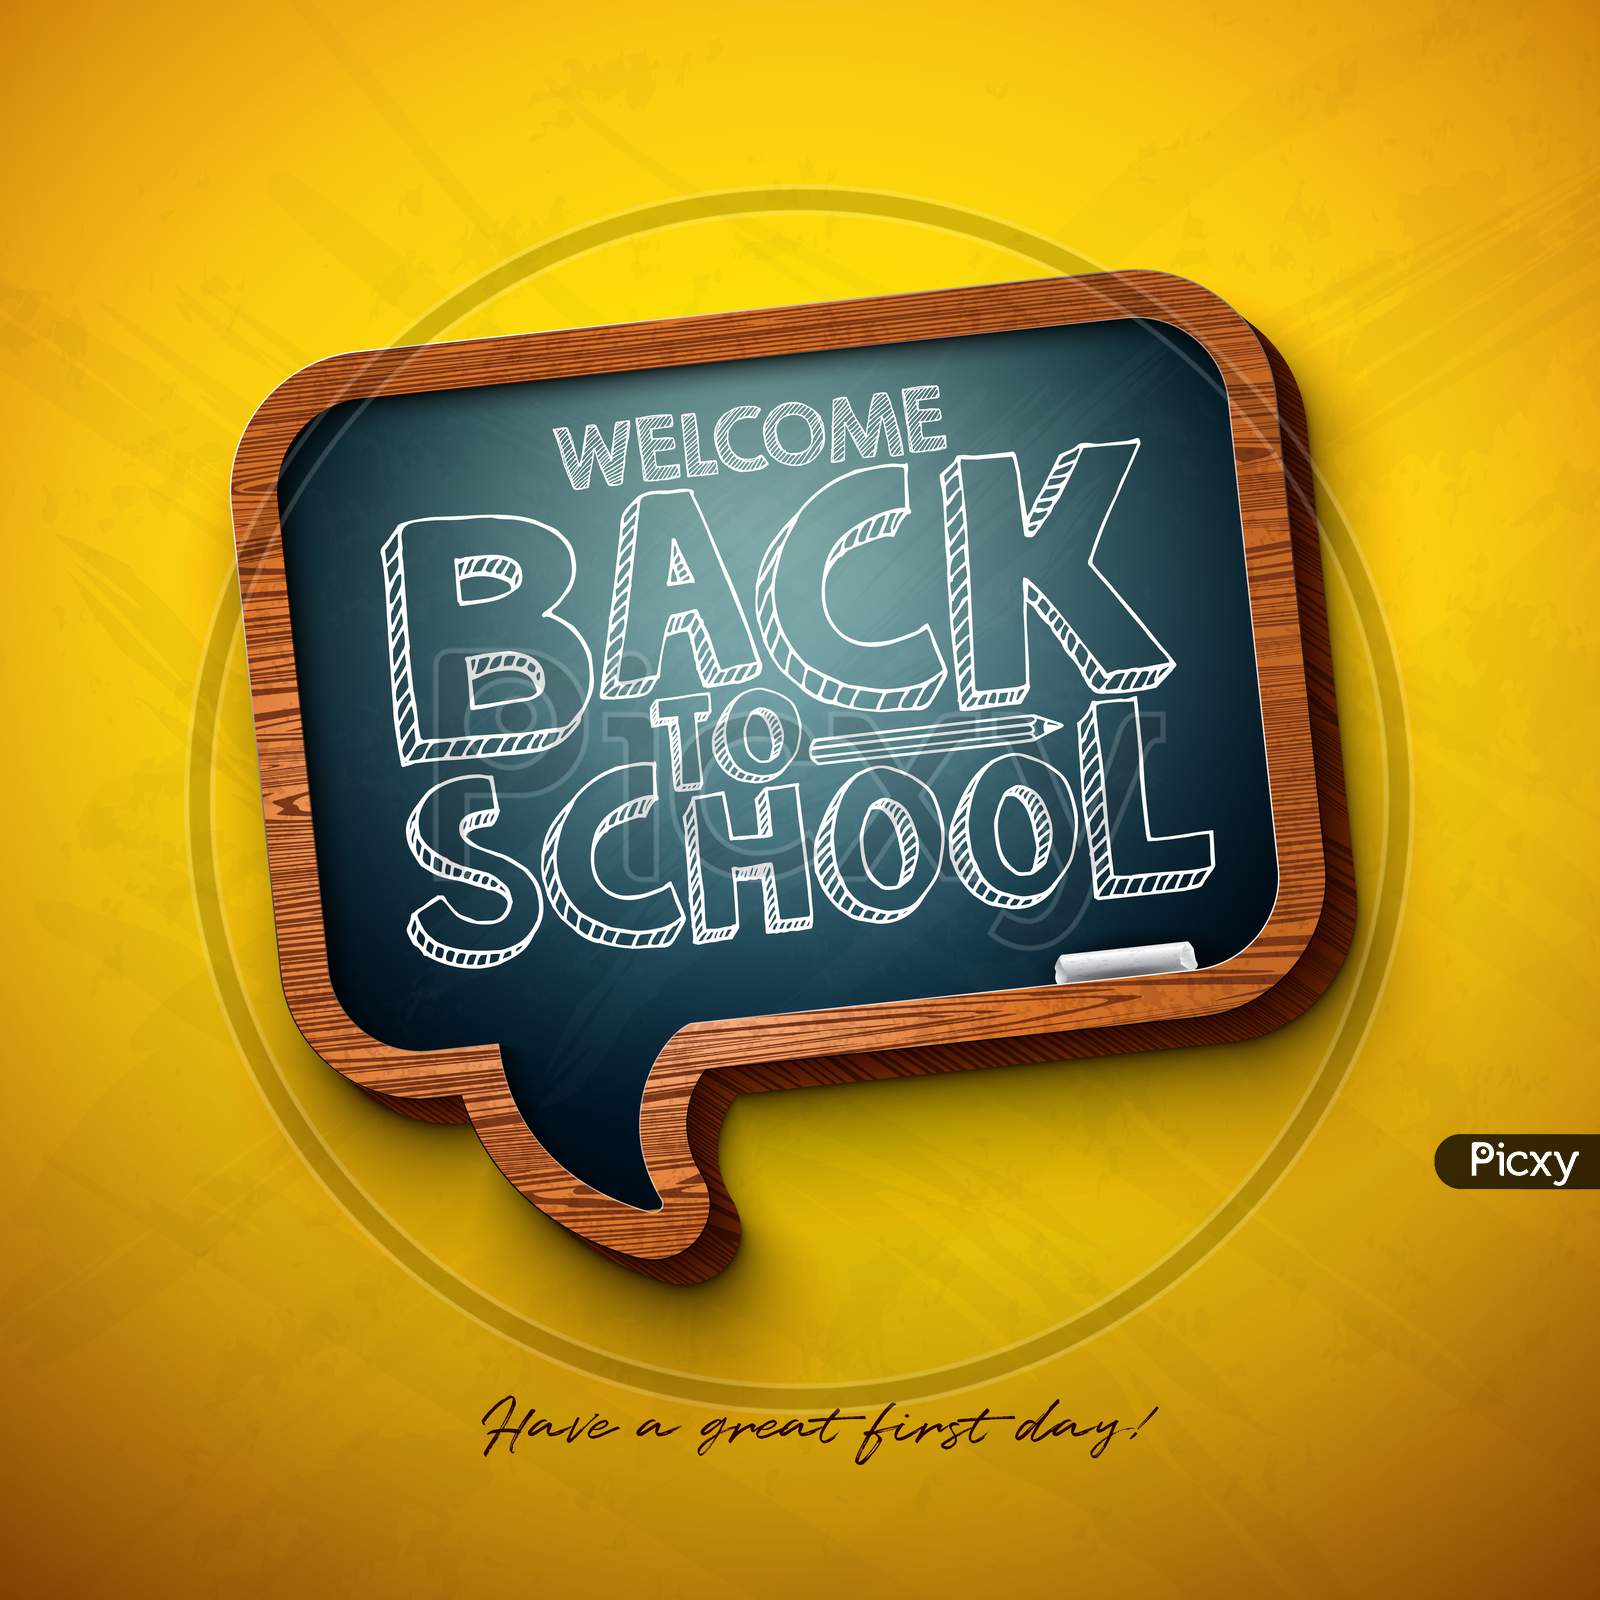 Back To School Design With Chalkboard And Typography Lettering On Yellow Background. Vector Education Concept Illustration For Greeting Card, Banner, Flyer, Invitation, Brochure Or Promotional Poster.